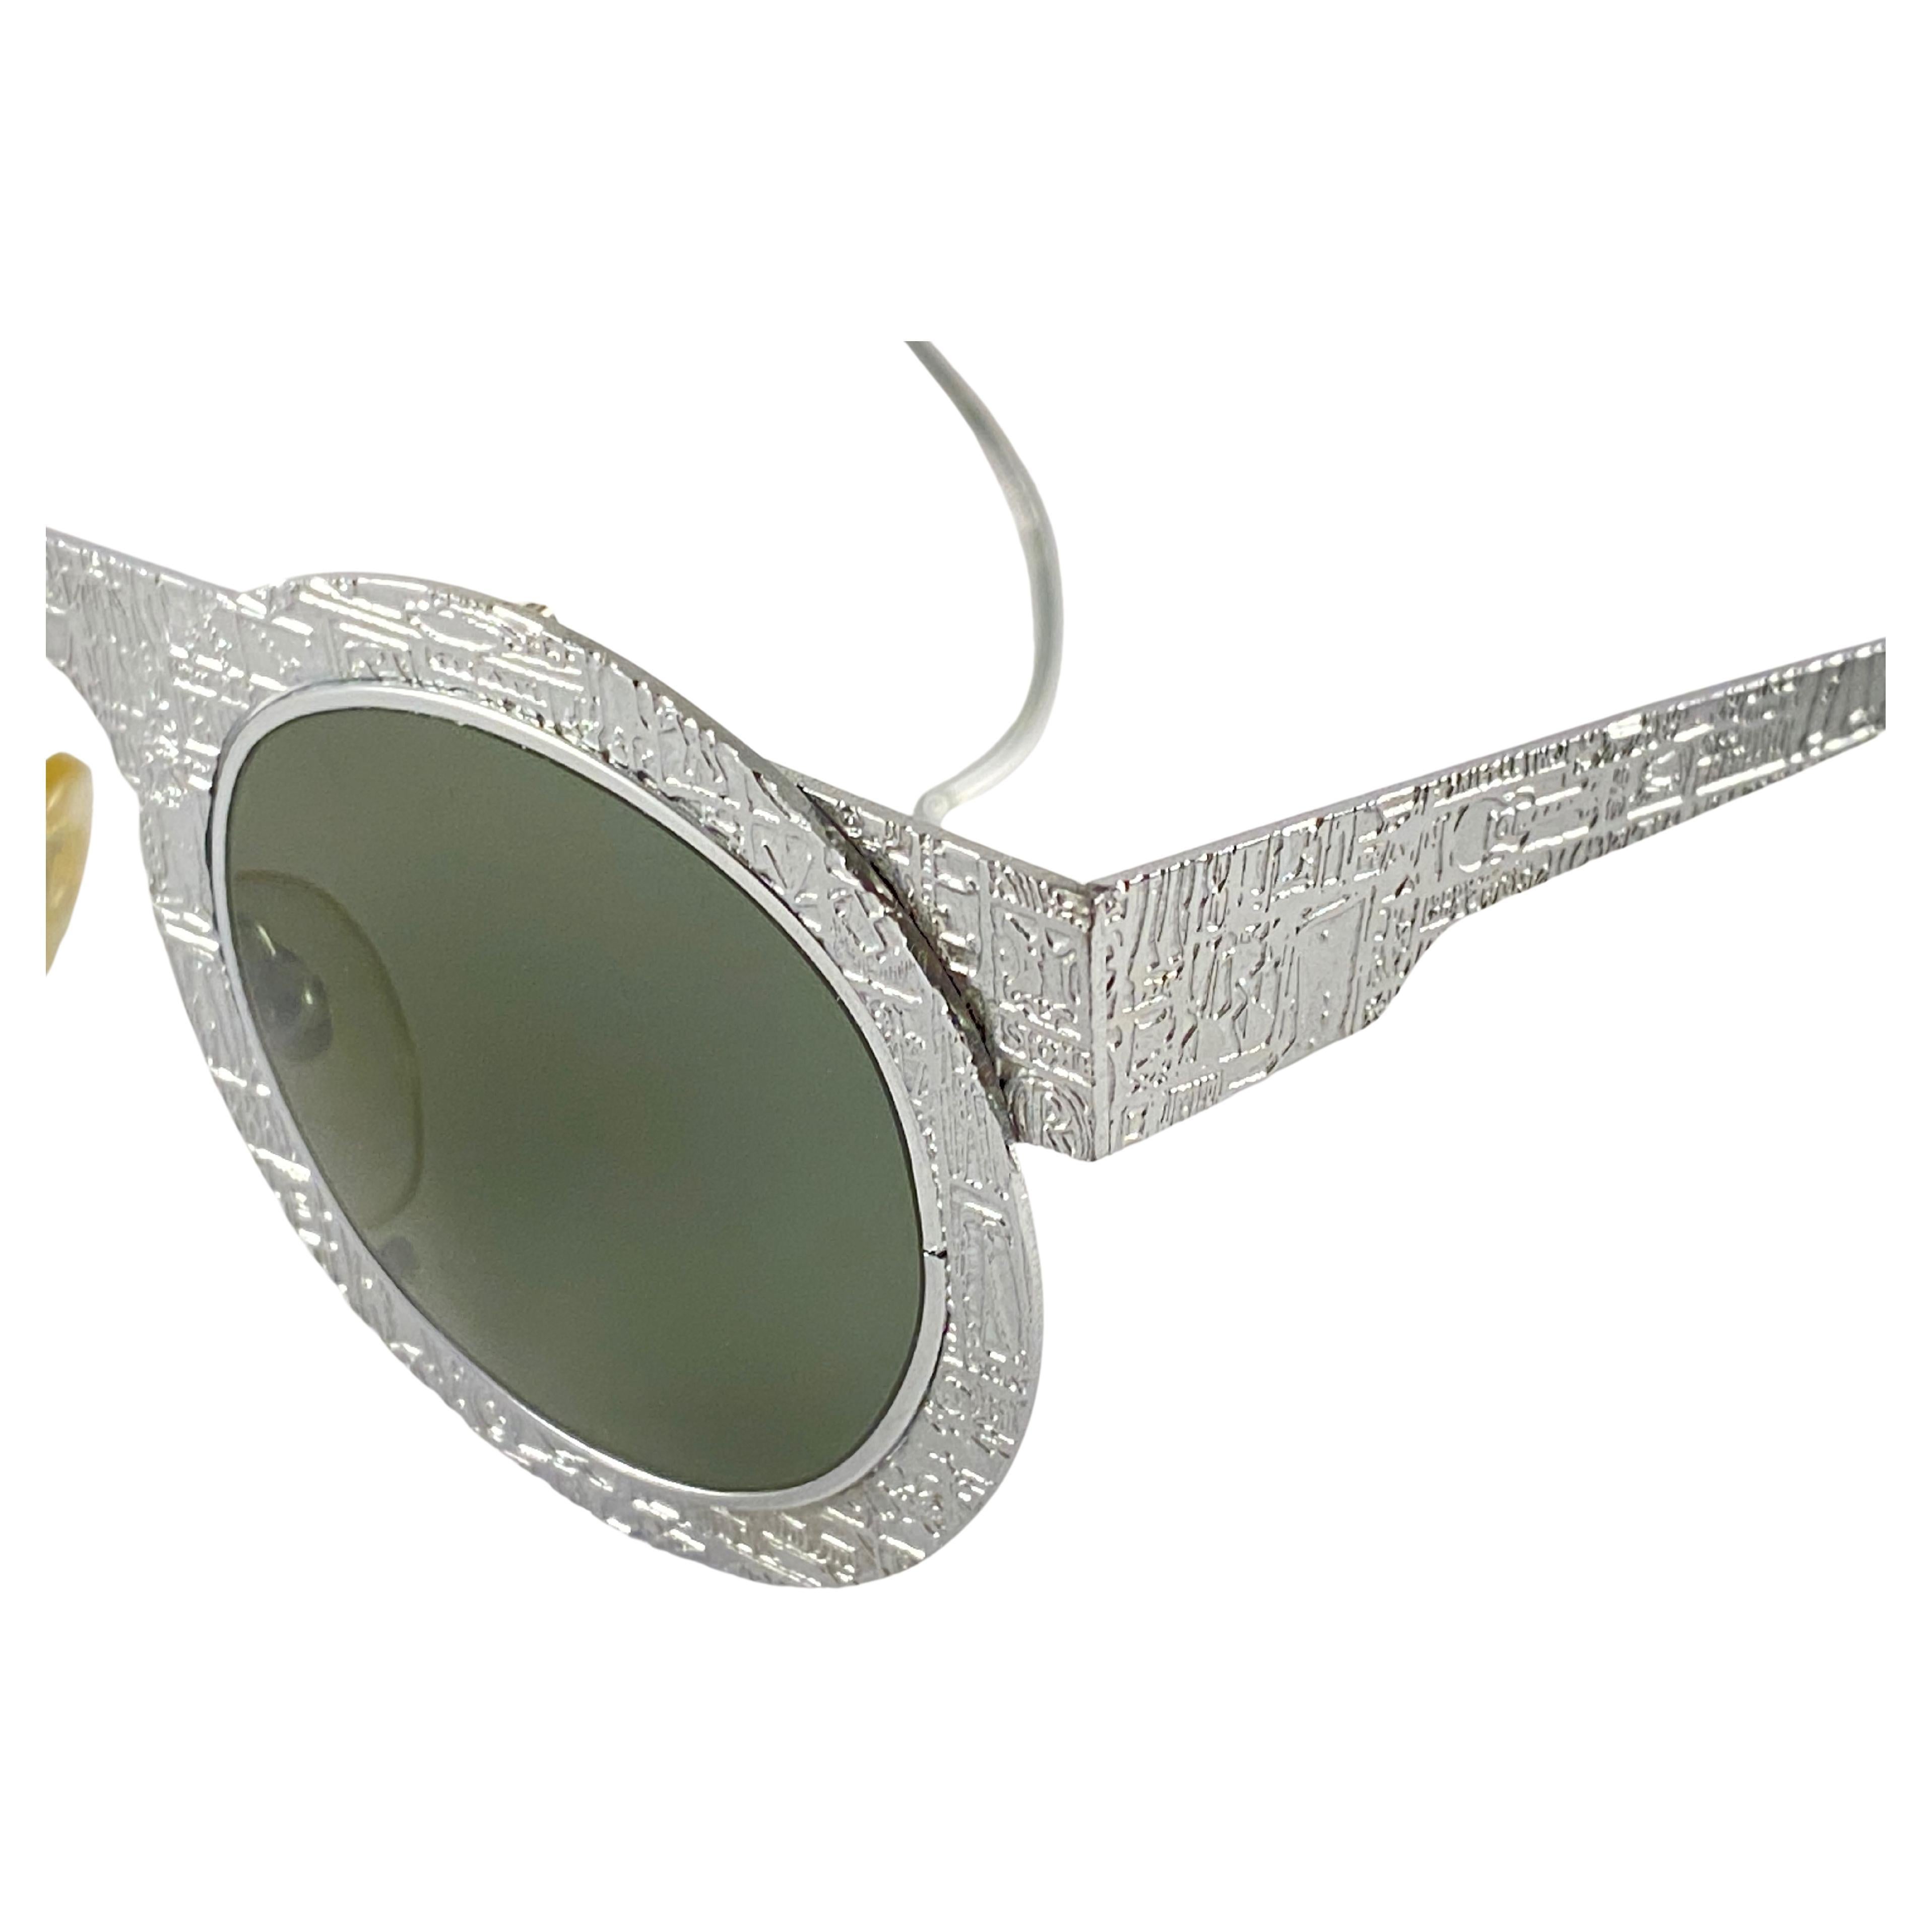 New Vintage IDC Pour Marithe Francois Girbaud Round Silver Sunglasses France In New Condition For Sale In Baleares, Baleares